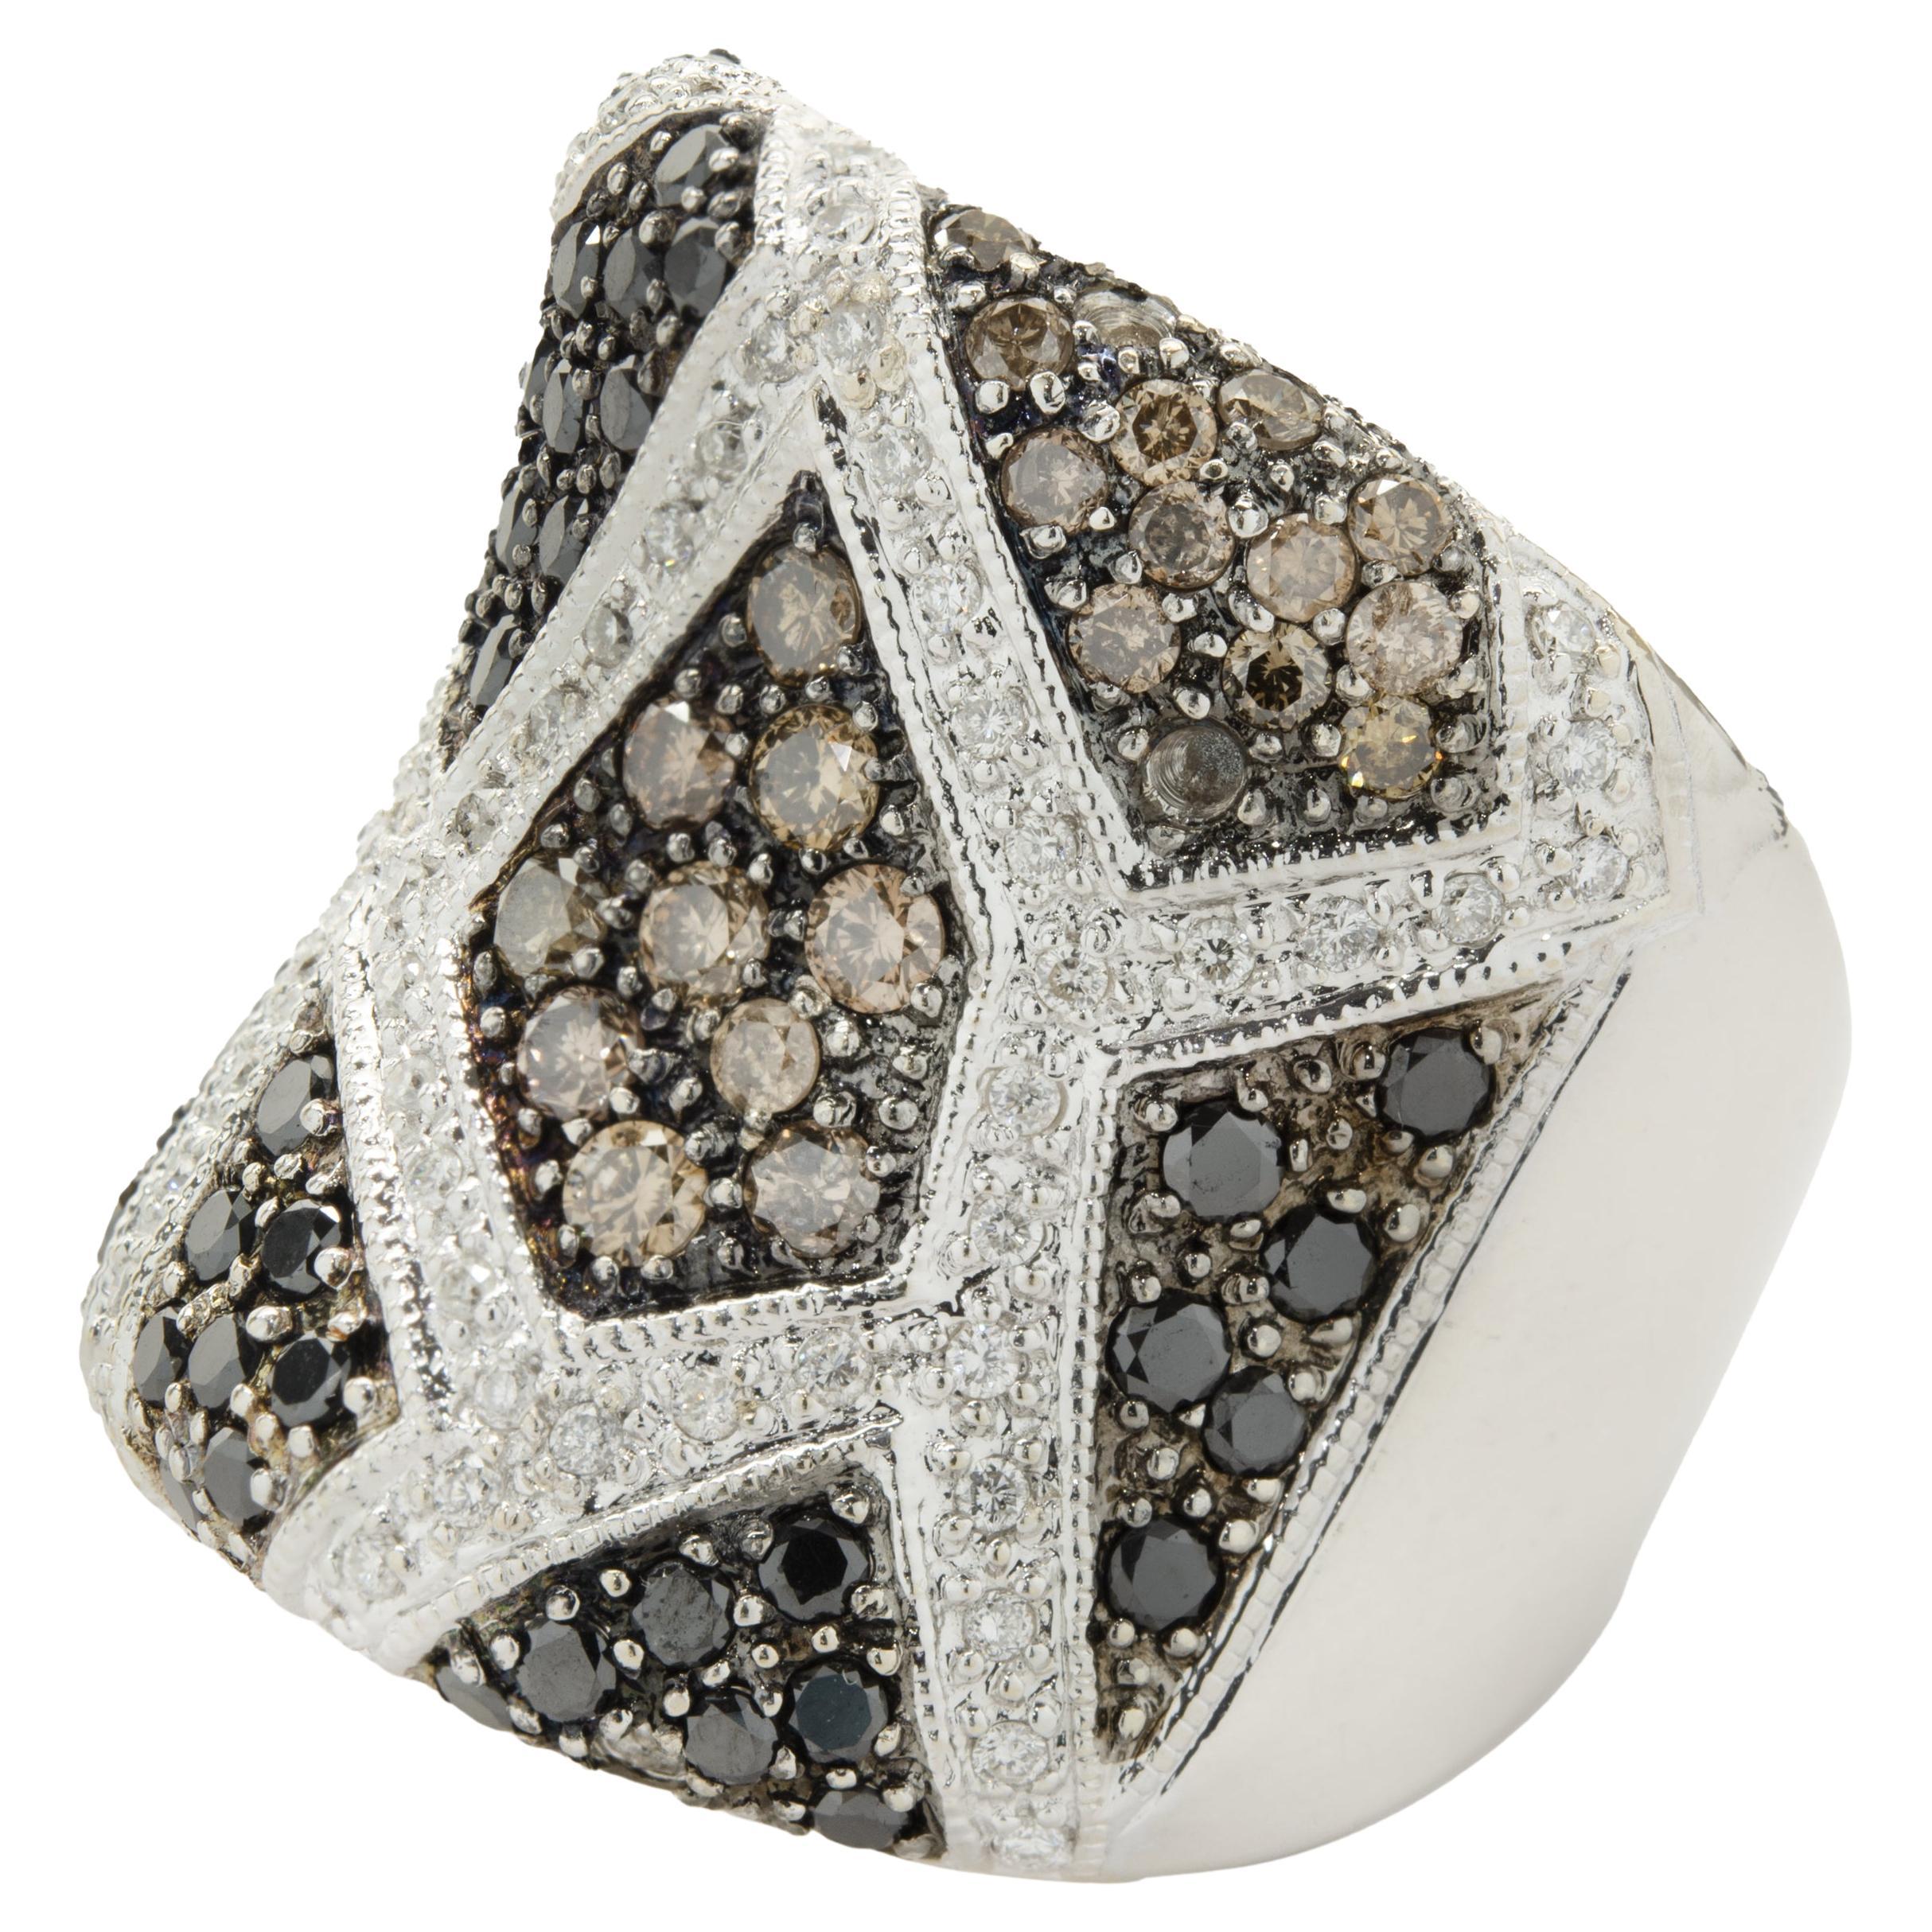 Designer: custom
Material: 14K white Gold
Diamond: 84 round brilliant cut = 1.00cttw
Color: Chocolate / Black
Clarity: SI2
Diamond: 70 round brilliant cut = 0.90cttw
Color: G
Clarity: SI1
Ring size: 9.5 (please allow two additional shipping days for